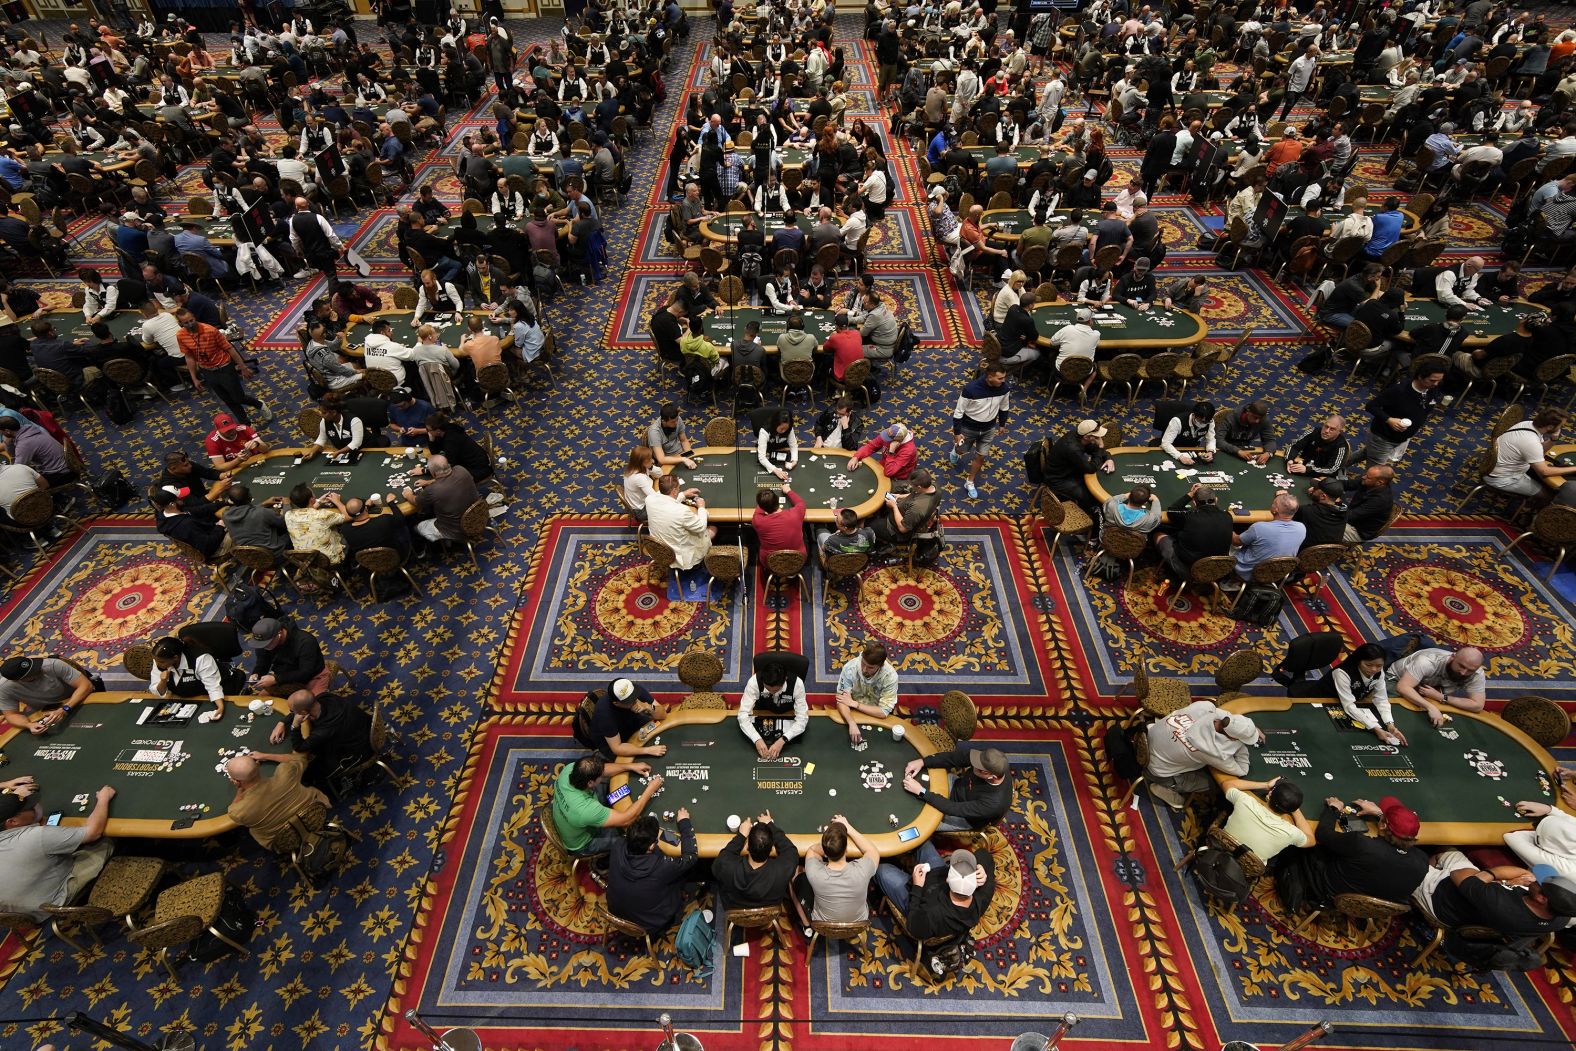 Players compete in the main event of the World Series of Poker in 2022.